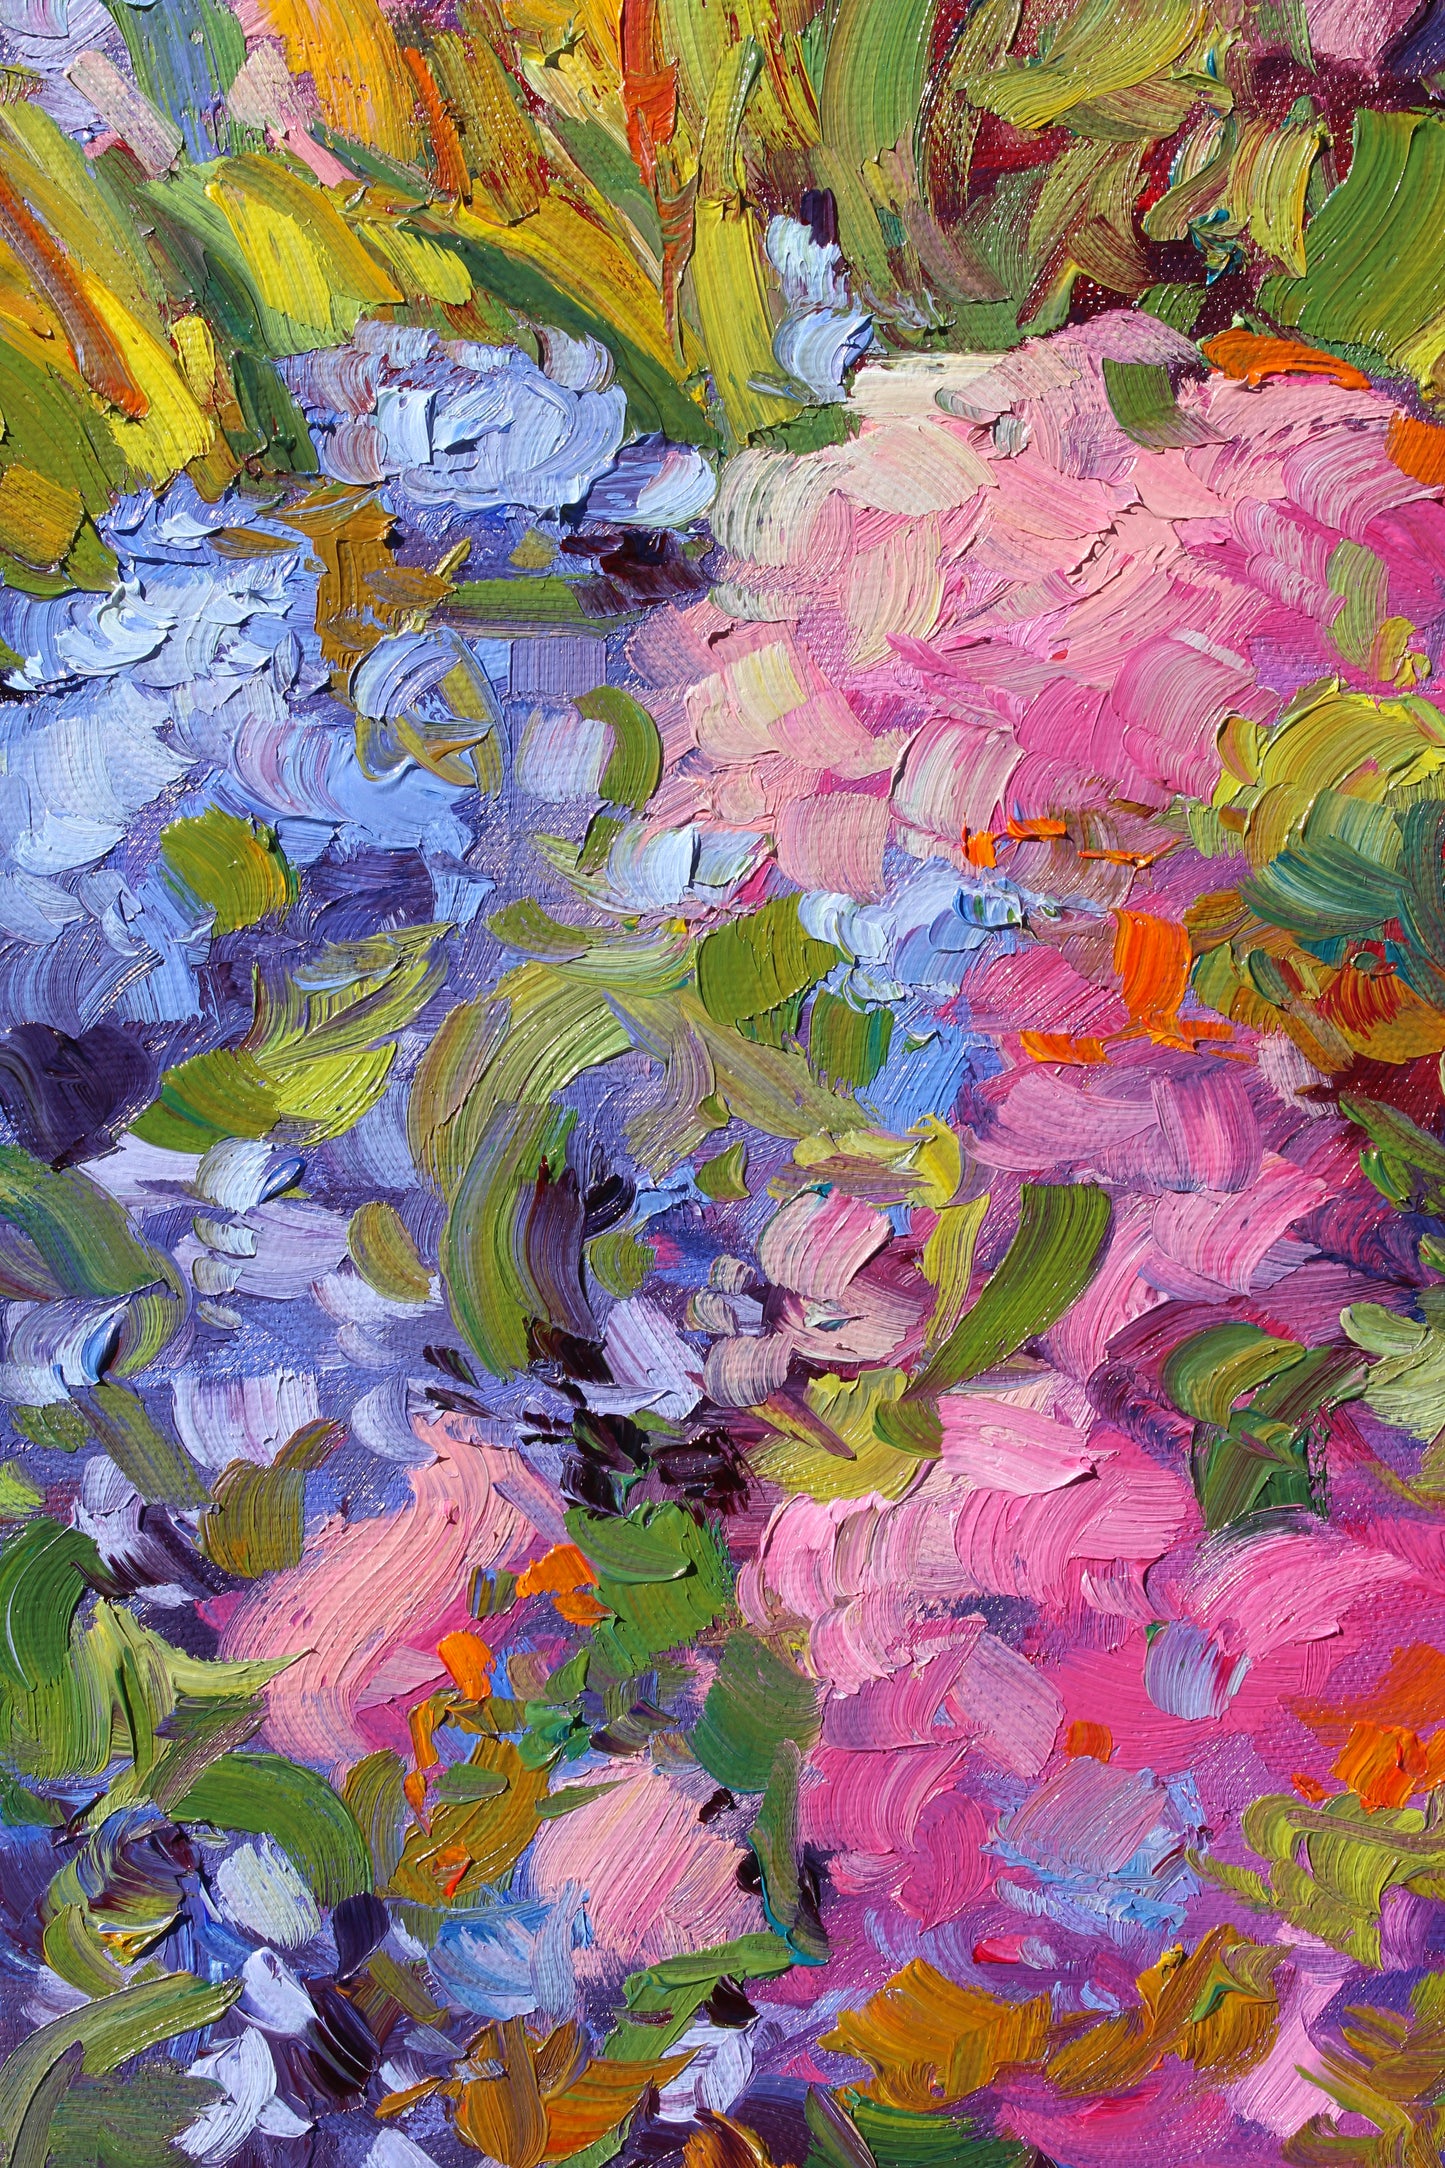 In Bloom, An Original 12" x 10" Floral Garden Oil On Canvas Panel